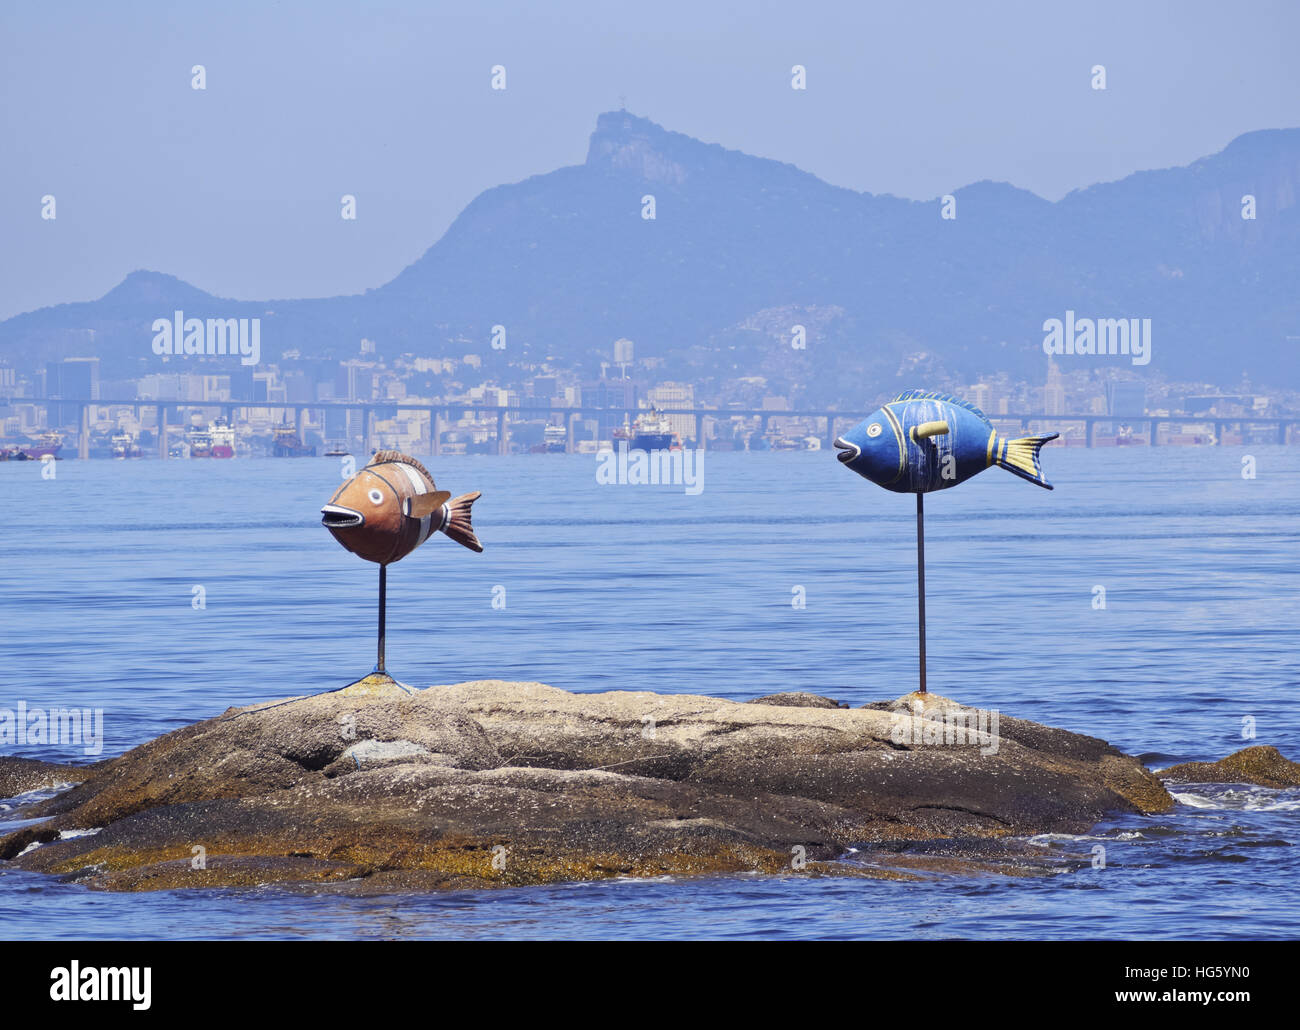 Brazil, State of Rio de Janeiro, Guanabara Bay, Paqueta Island, View of the coast of the island with two fished and Corcovado Stock Photo